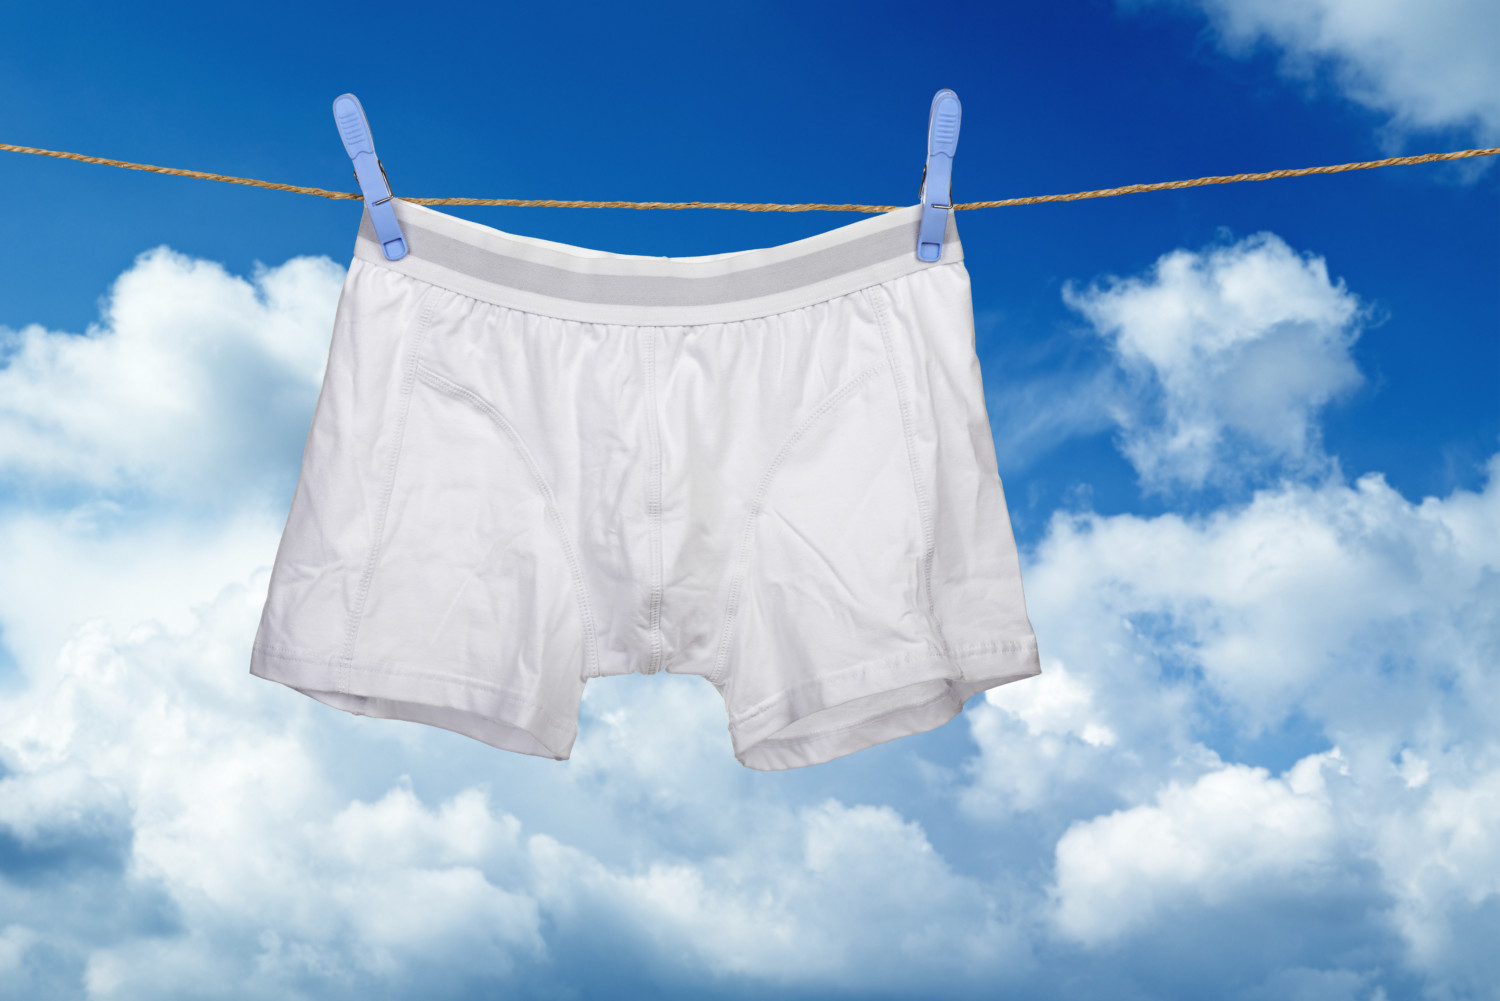 This survey found some surprising stats about Americans' underwear habits